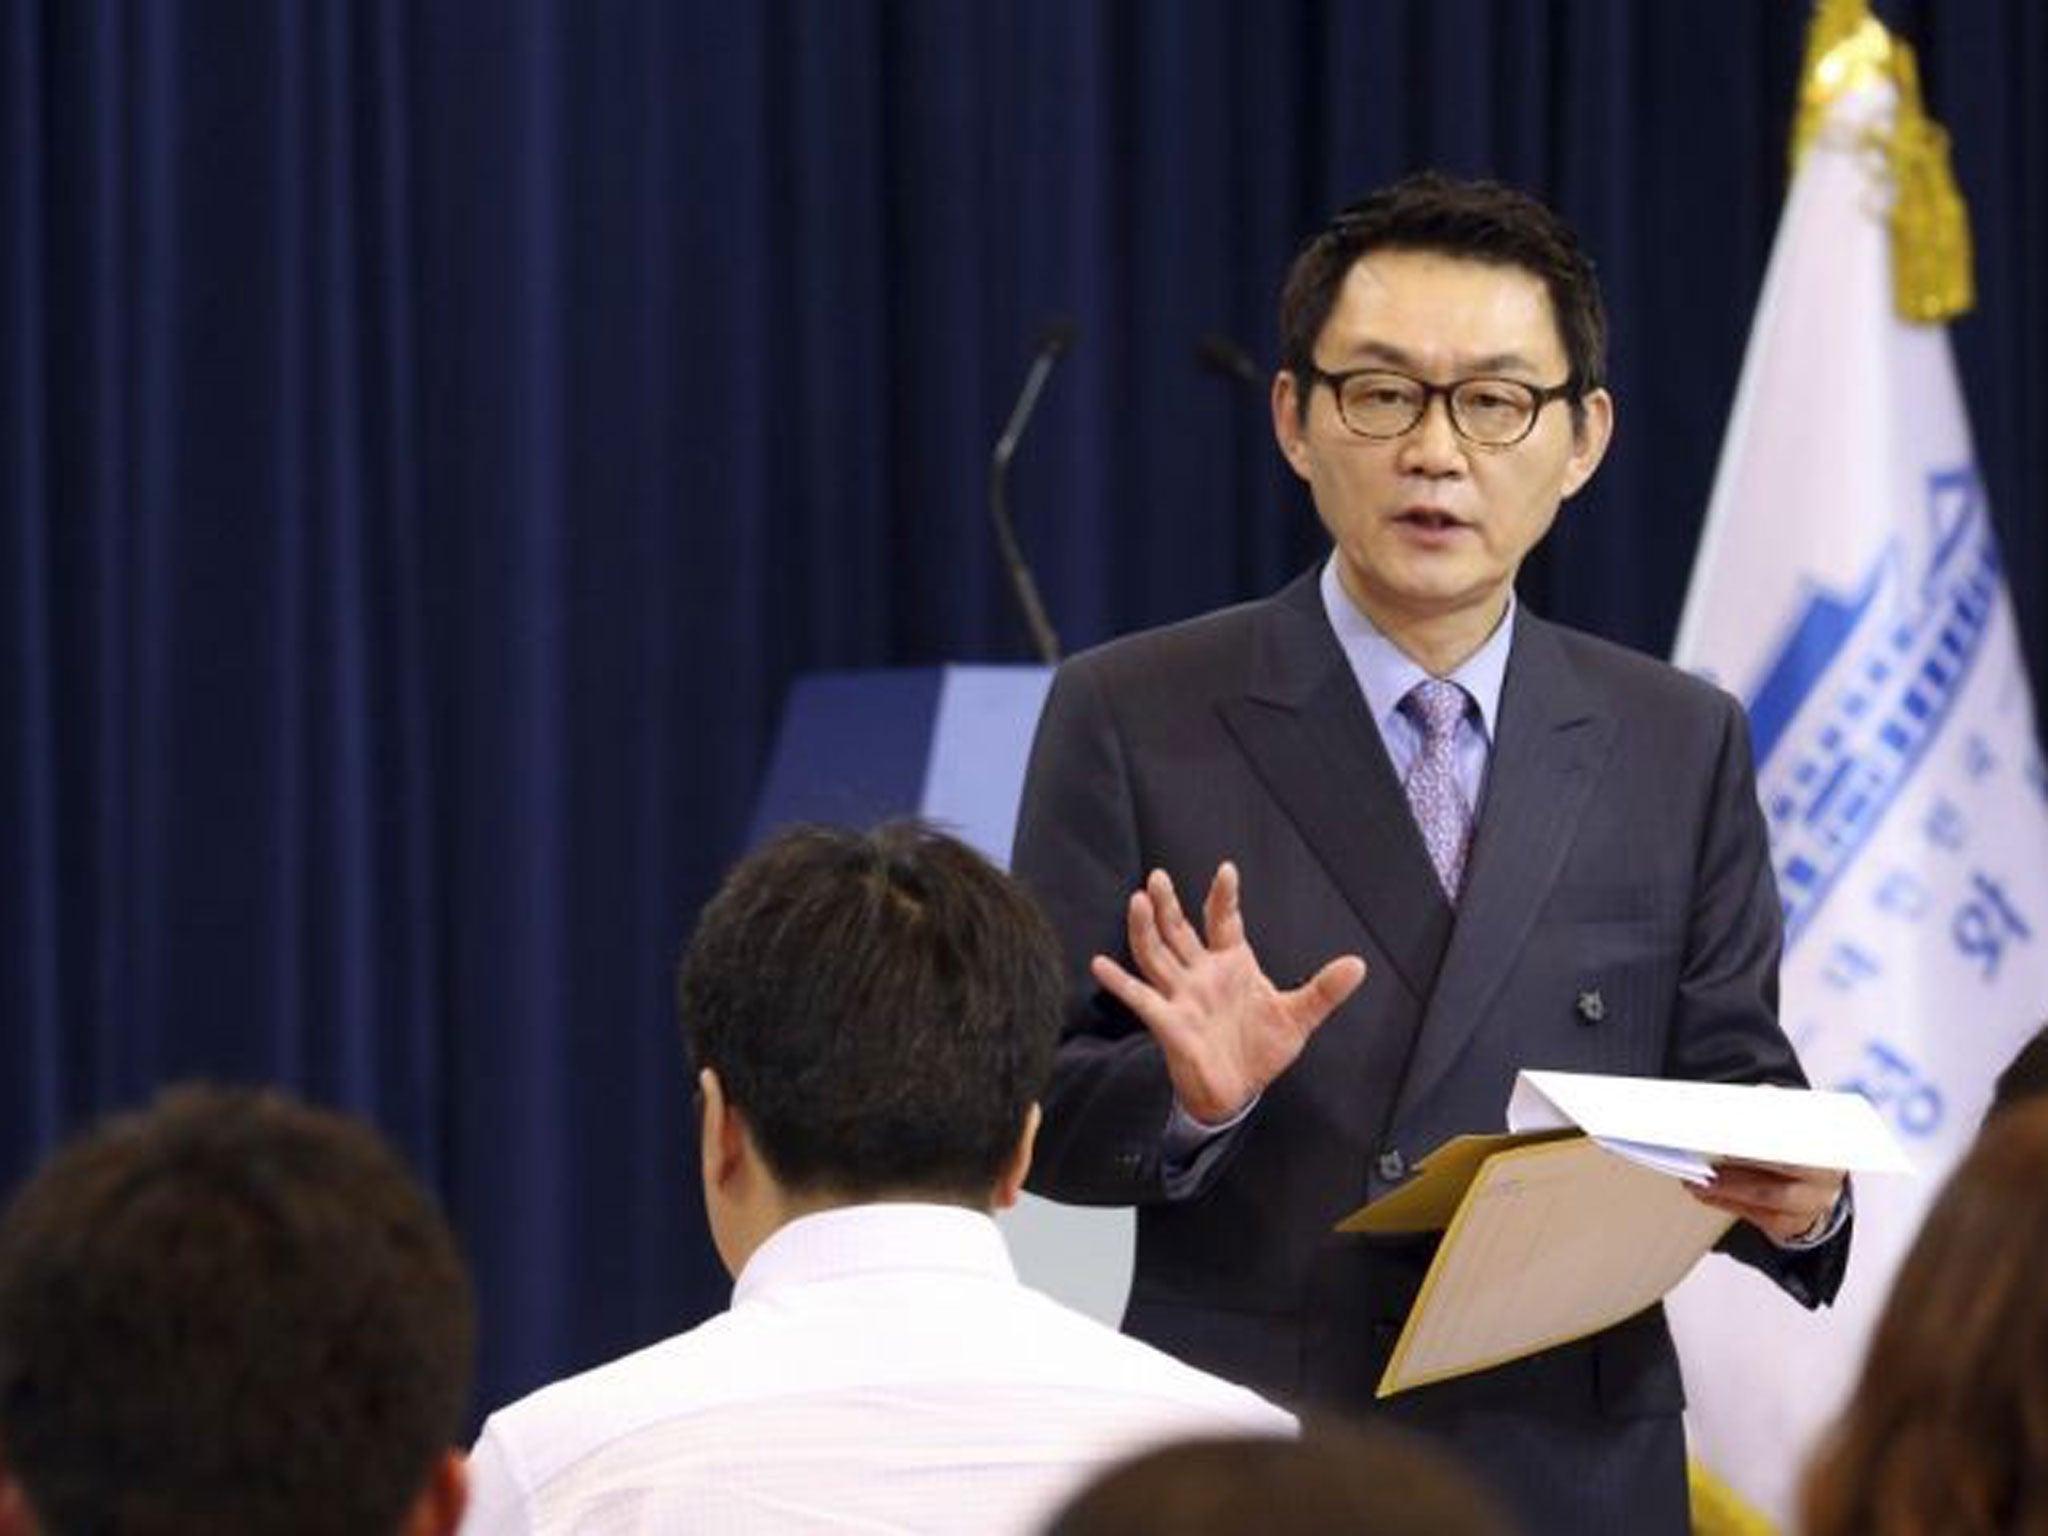 Yoon Chang-jung, spokesman of South Korean President Park Geun-hye, speaks in front of reporters at the presidential Blue House in Seoul